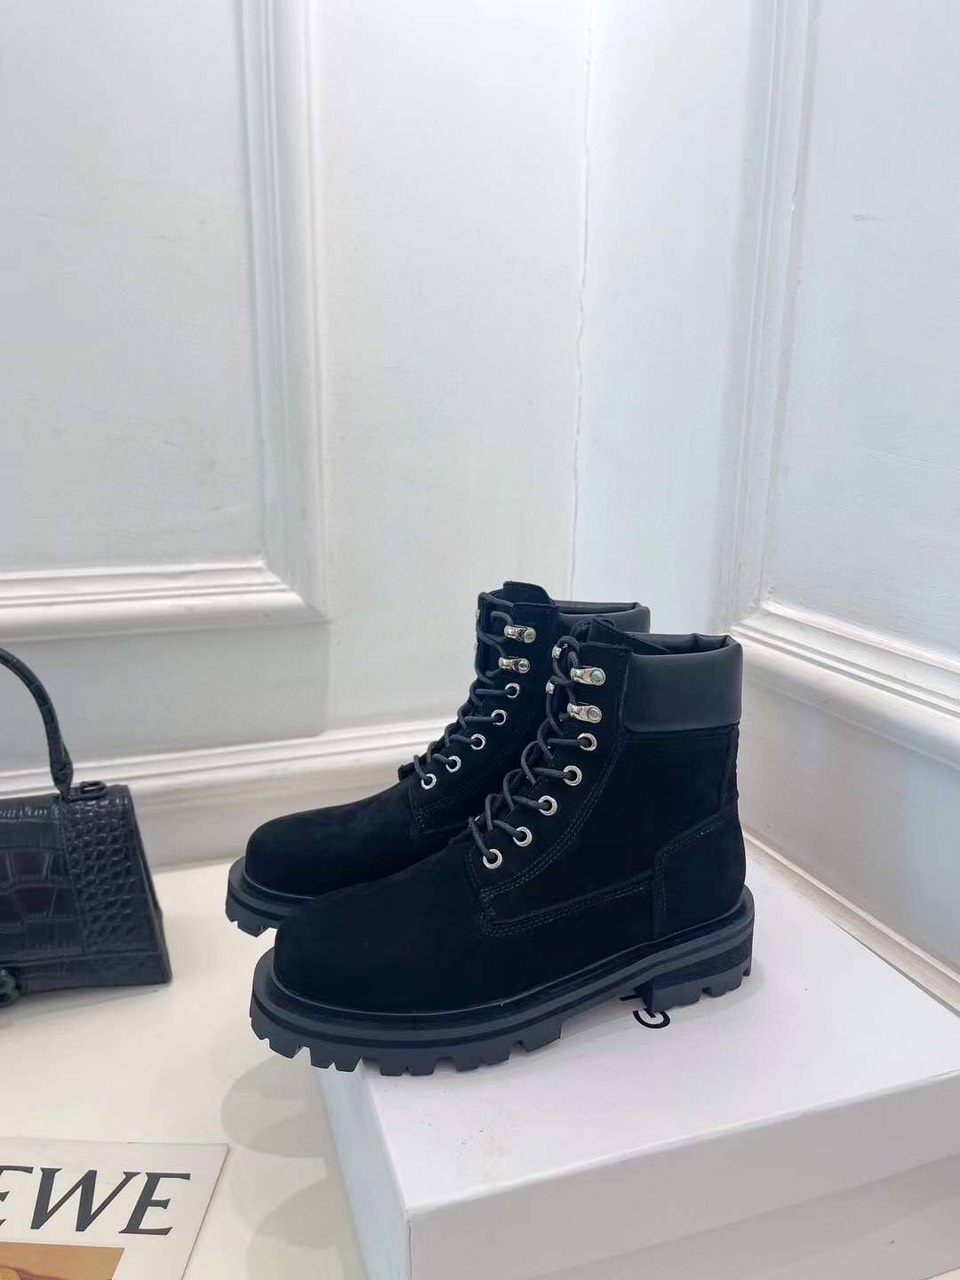 Givenchy Unisex Ankle Boots - Replica Bags and Shoes online Store ...